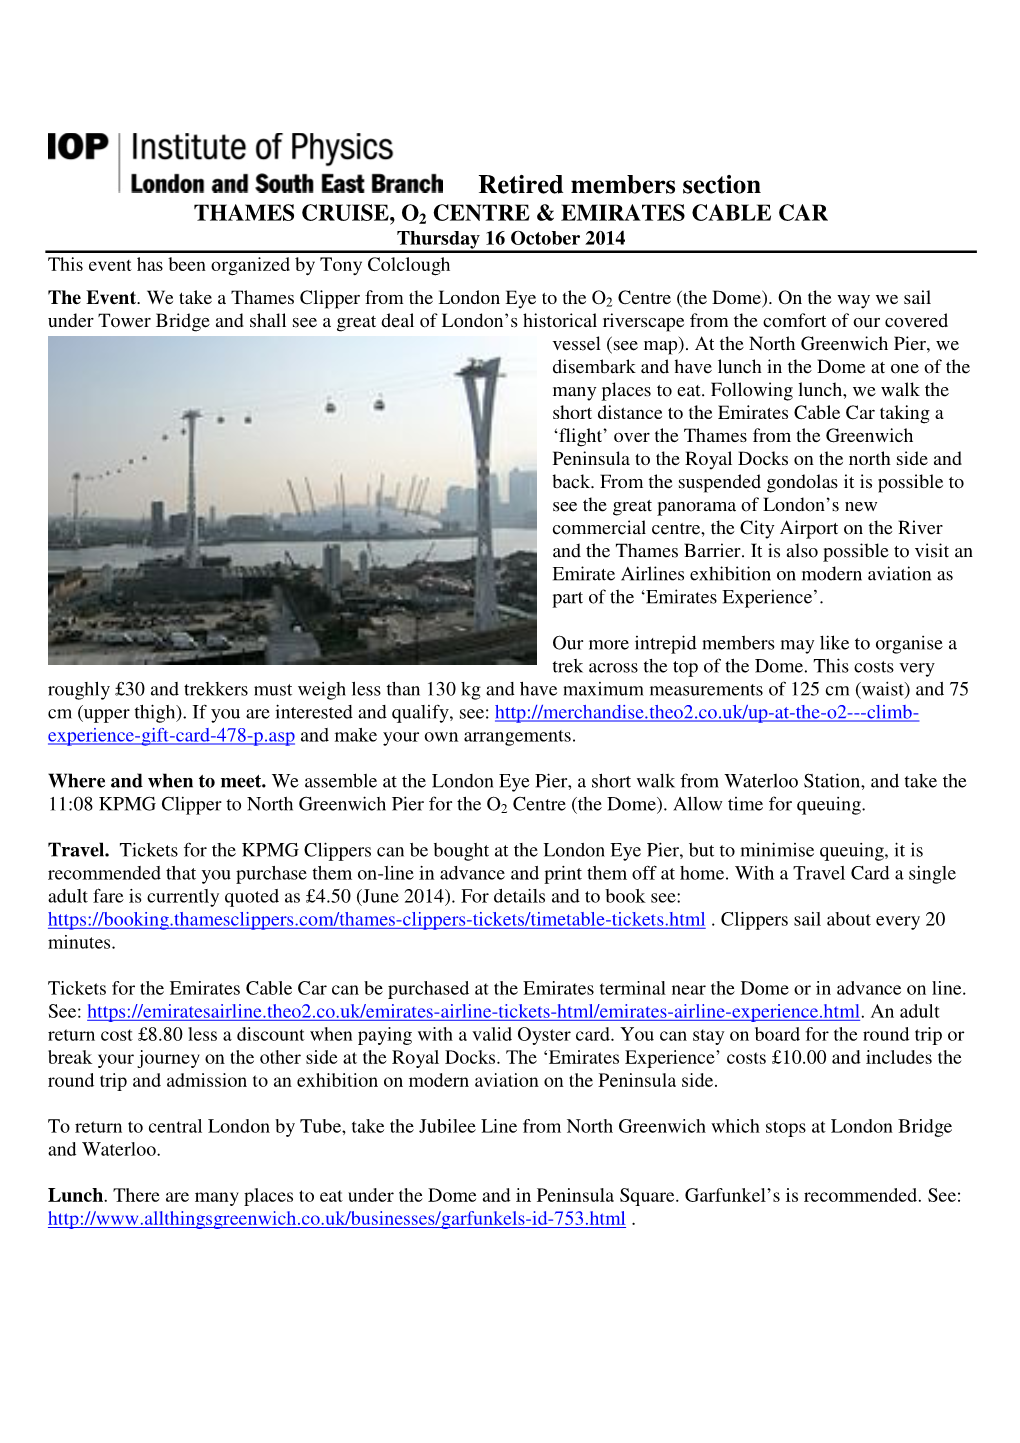 Retired Members Section THAMES CRUISE, O 2 CENTRE & EMIRATES CABLE CAR Thursday 16 October 2014 This Event Has Been Organized by Tony Colclough